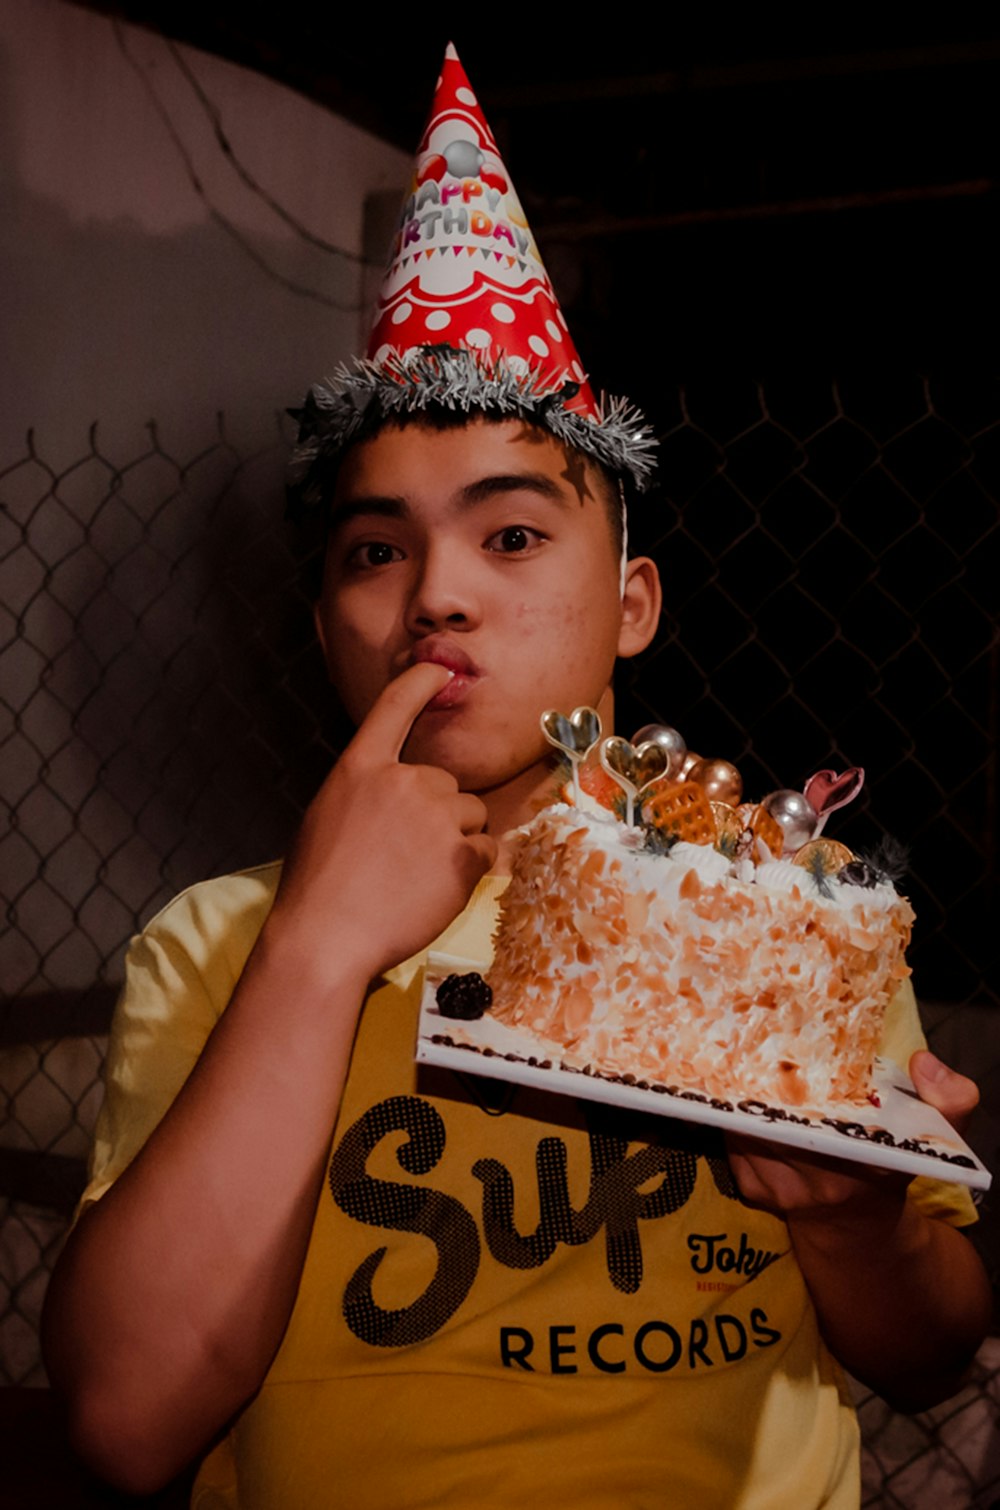 a young boy wearing a birthday hat holding a cake